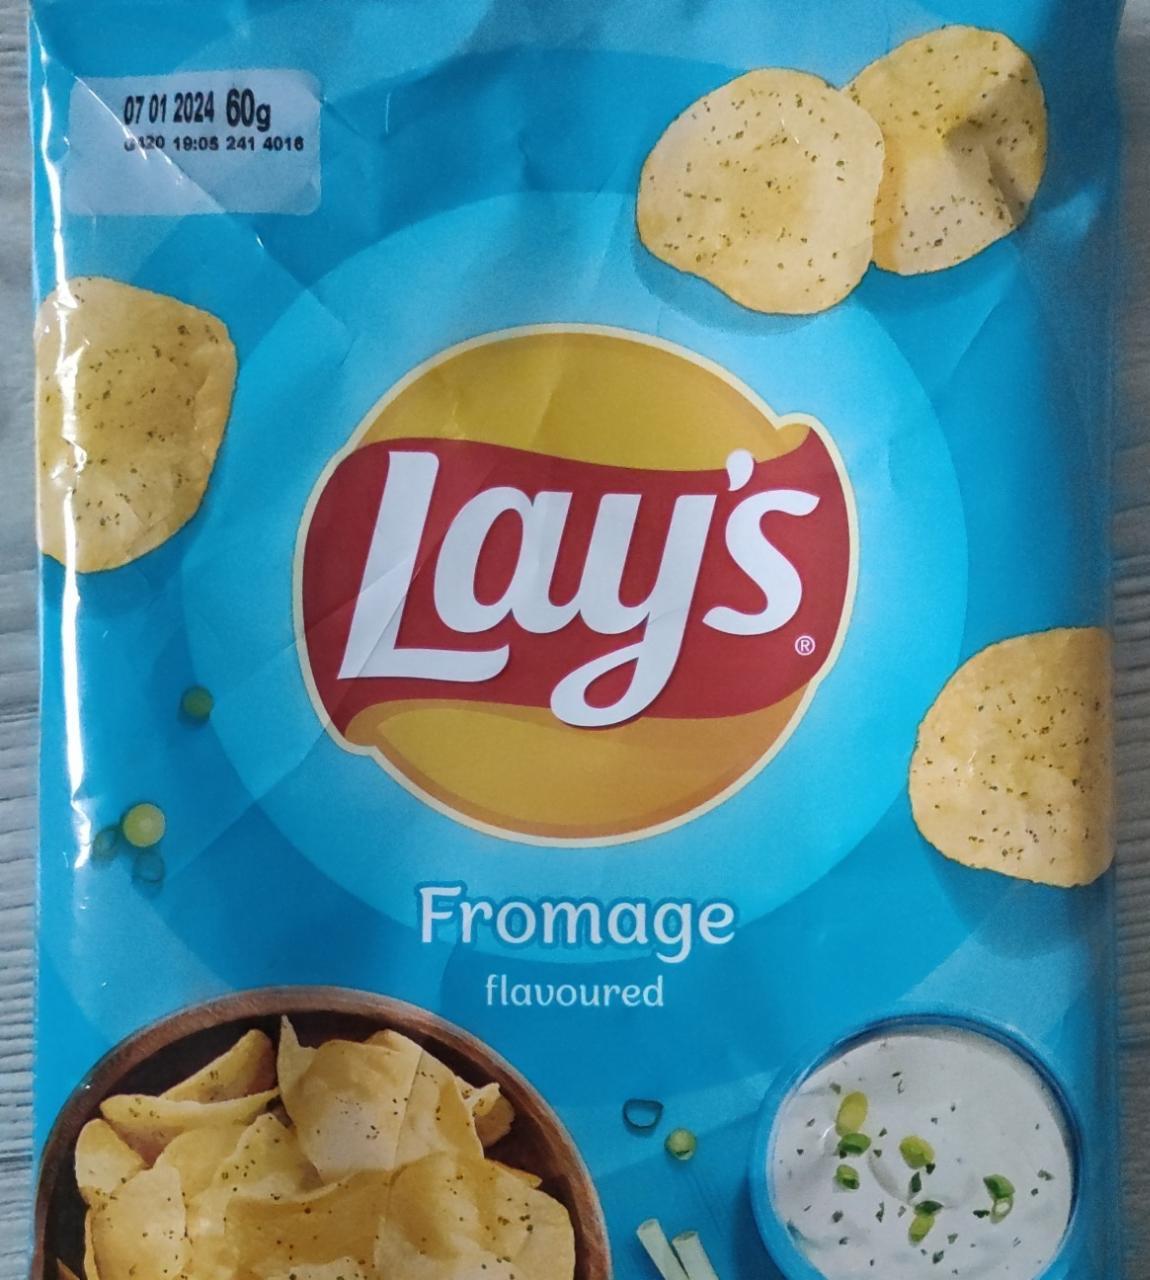 Képek - Lay's Fromage flavoured